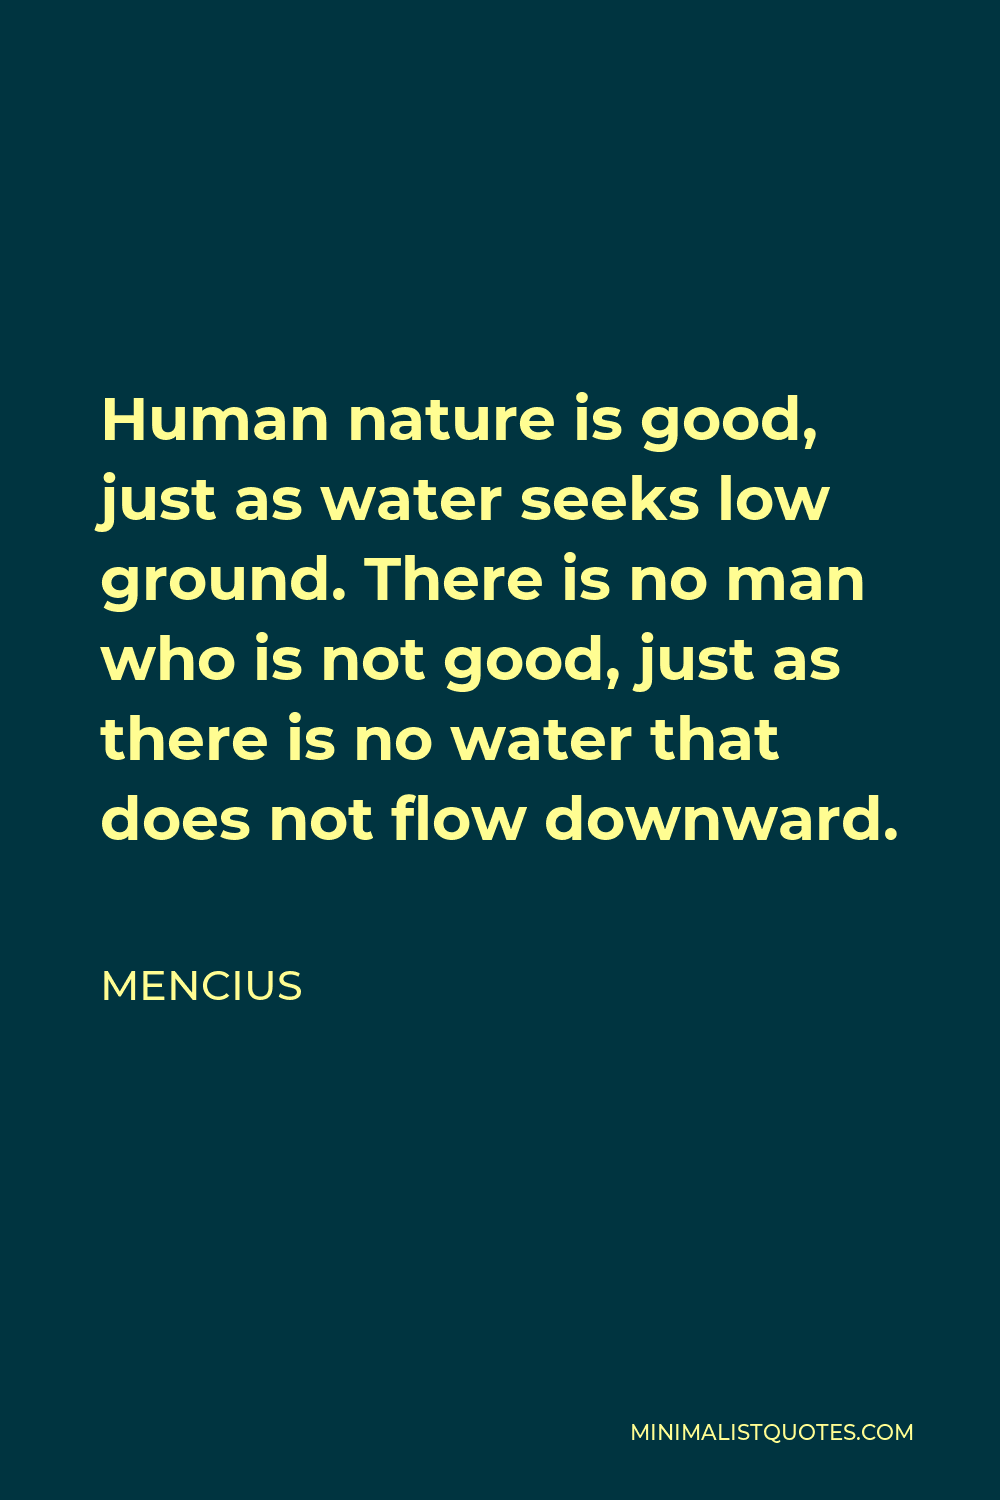 Mencius Quote: nature is good, just as water seeks low There is no man who is not good, just as there is no water that does not flow downward.